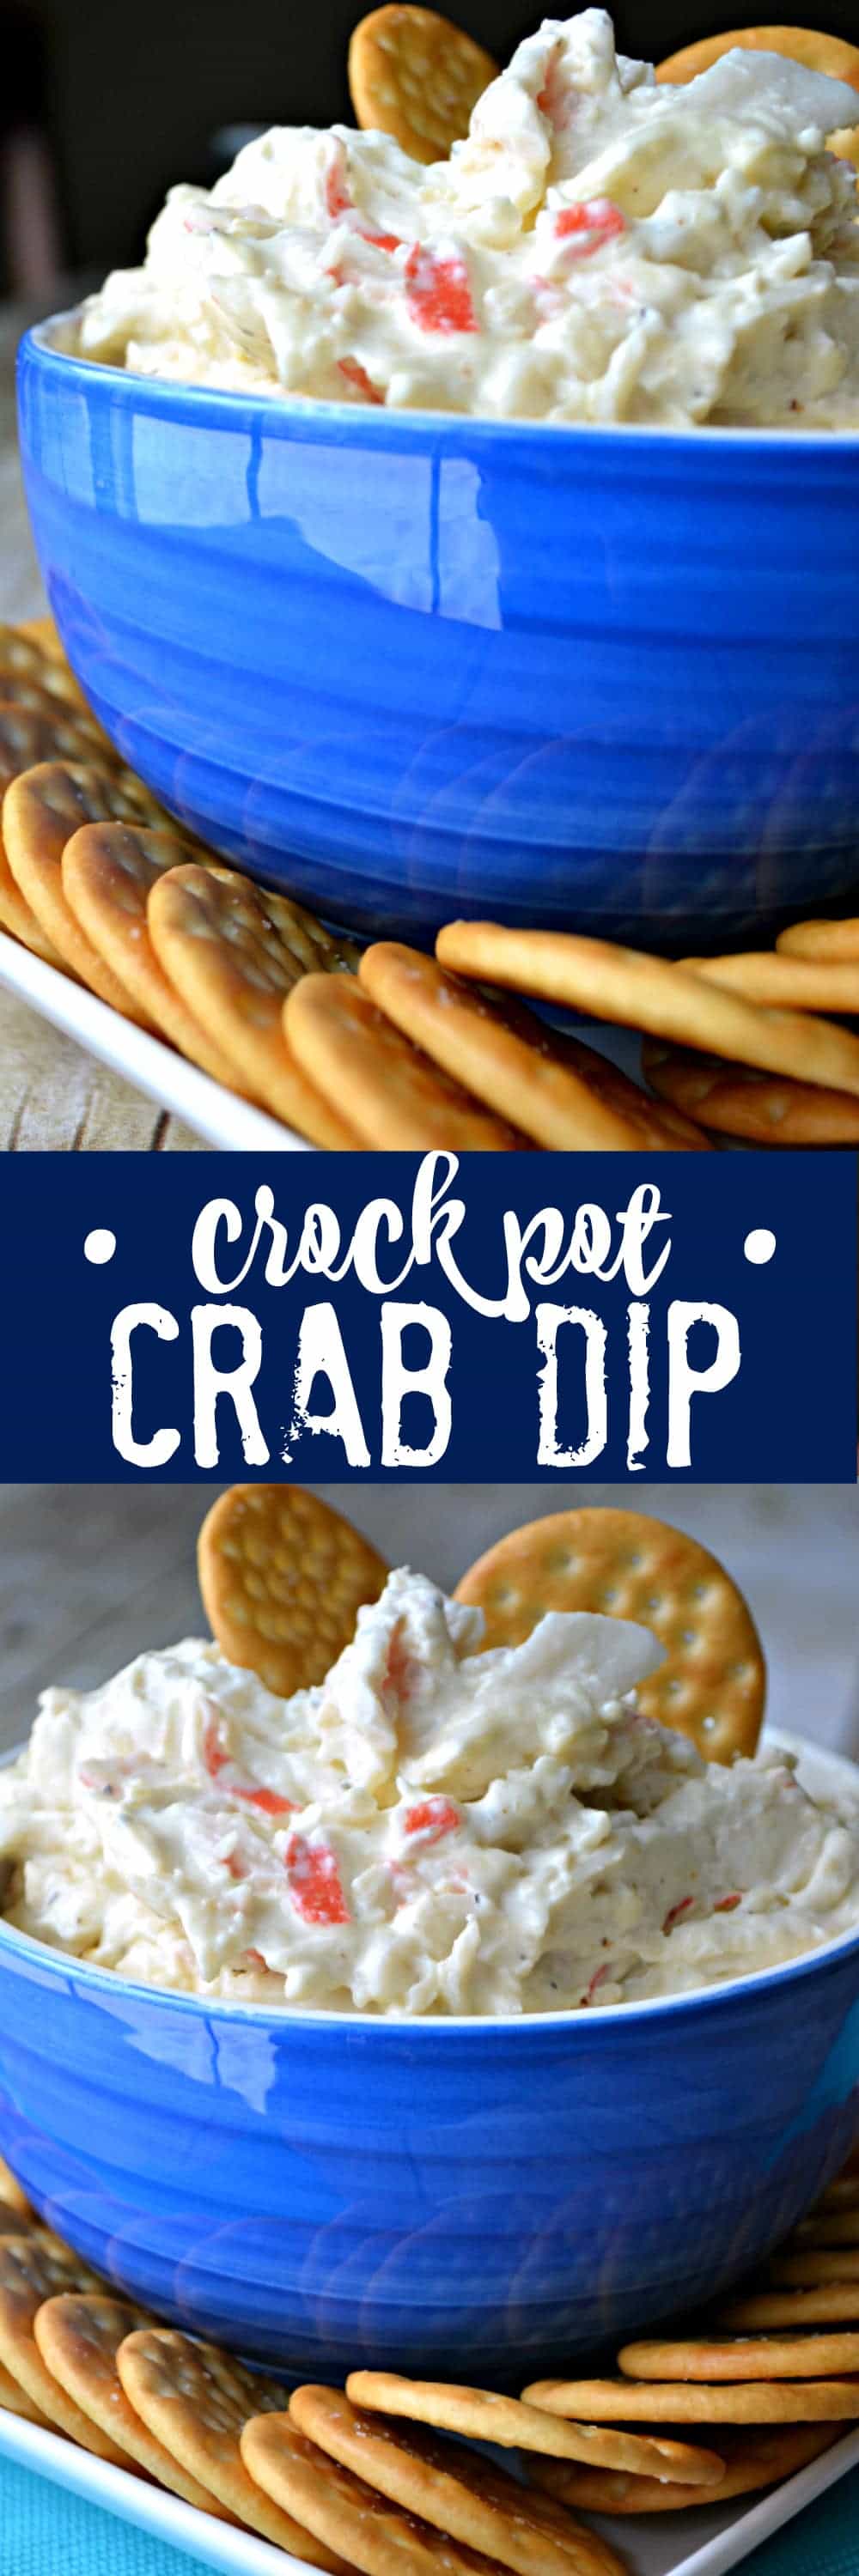 Deliciously creamy dip made with 2 different kinds of cheese, imitation crab, and a splash of white wine. It's simple, it's delicious, and best of all.....it's made in a crock pot! So you can enjoy the party!